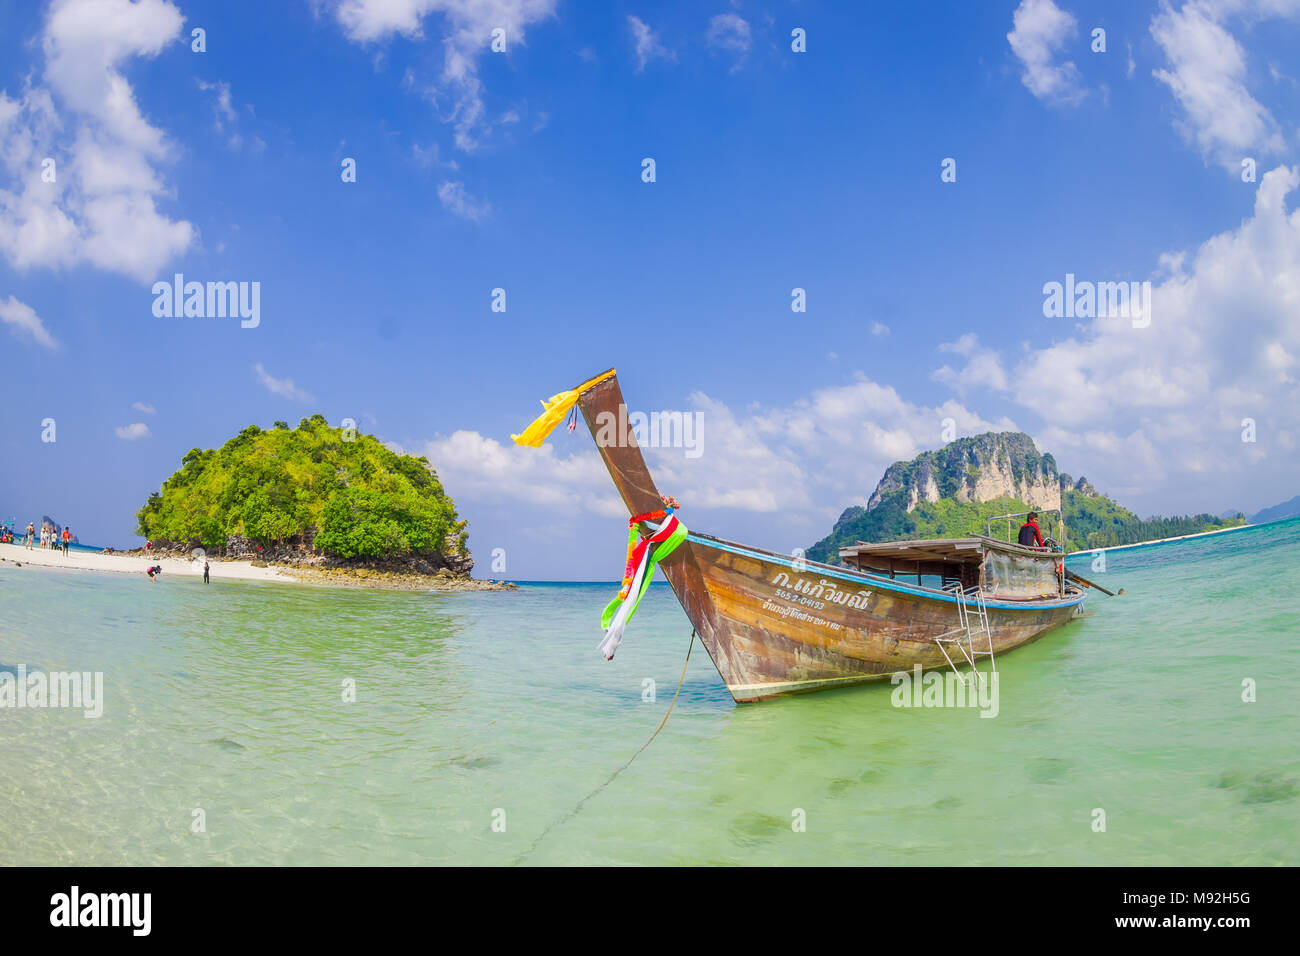 TUP, THAILAND - FEBRUARY 09, 2018: Amazing view of long tail boat in a shore on Tup island in a gorgeous sunny day and clean water Stock Photo